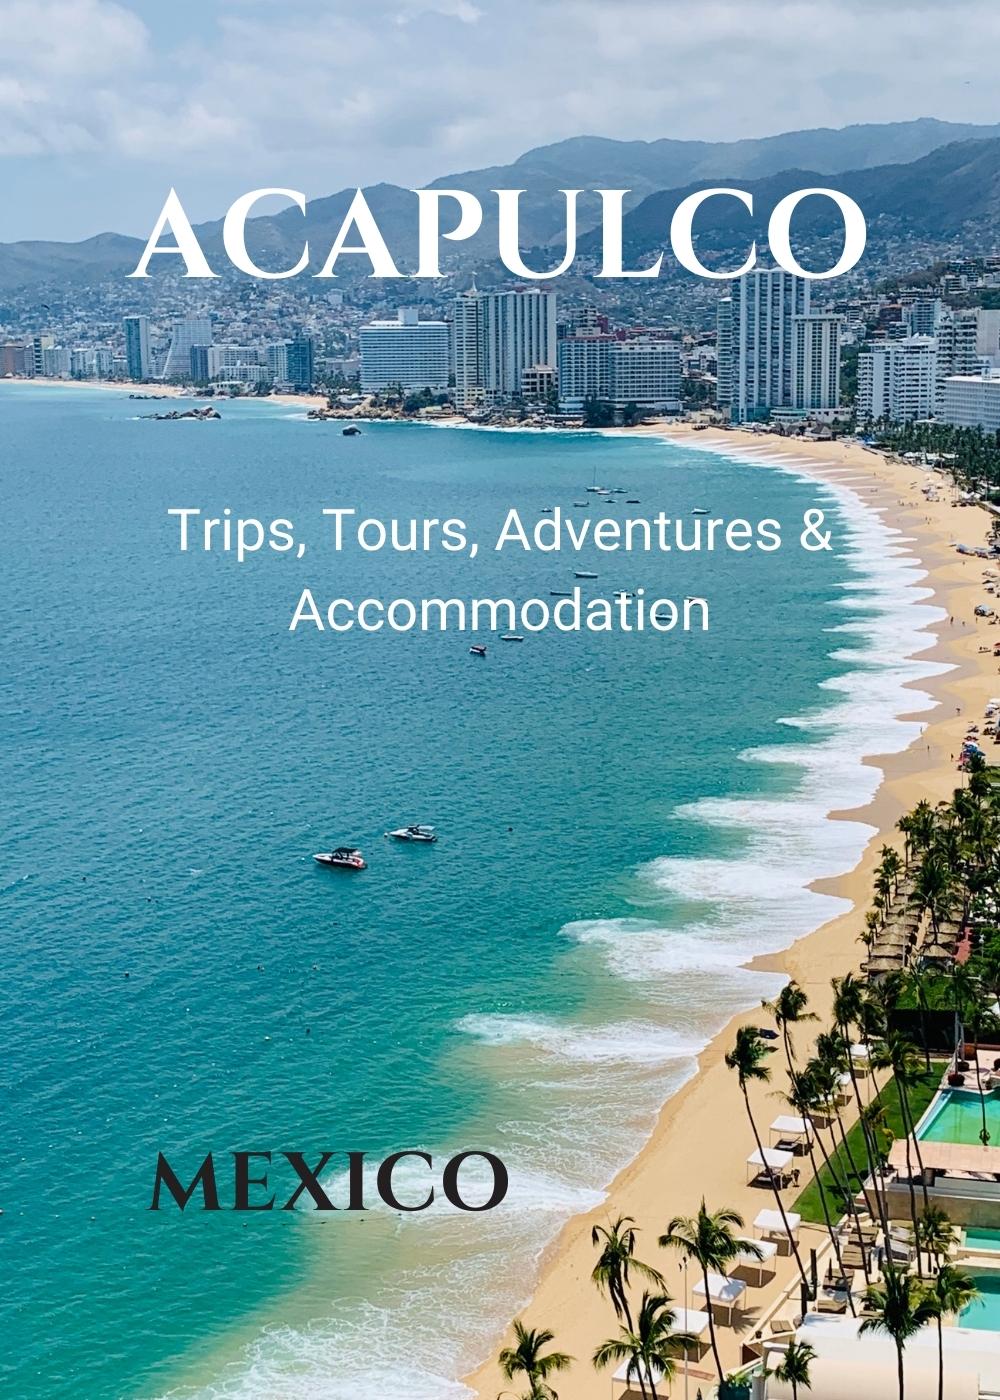 Visit Acapulco Things to do Adventures Where to stay Activities Trips and Tours